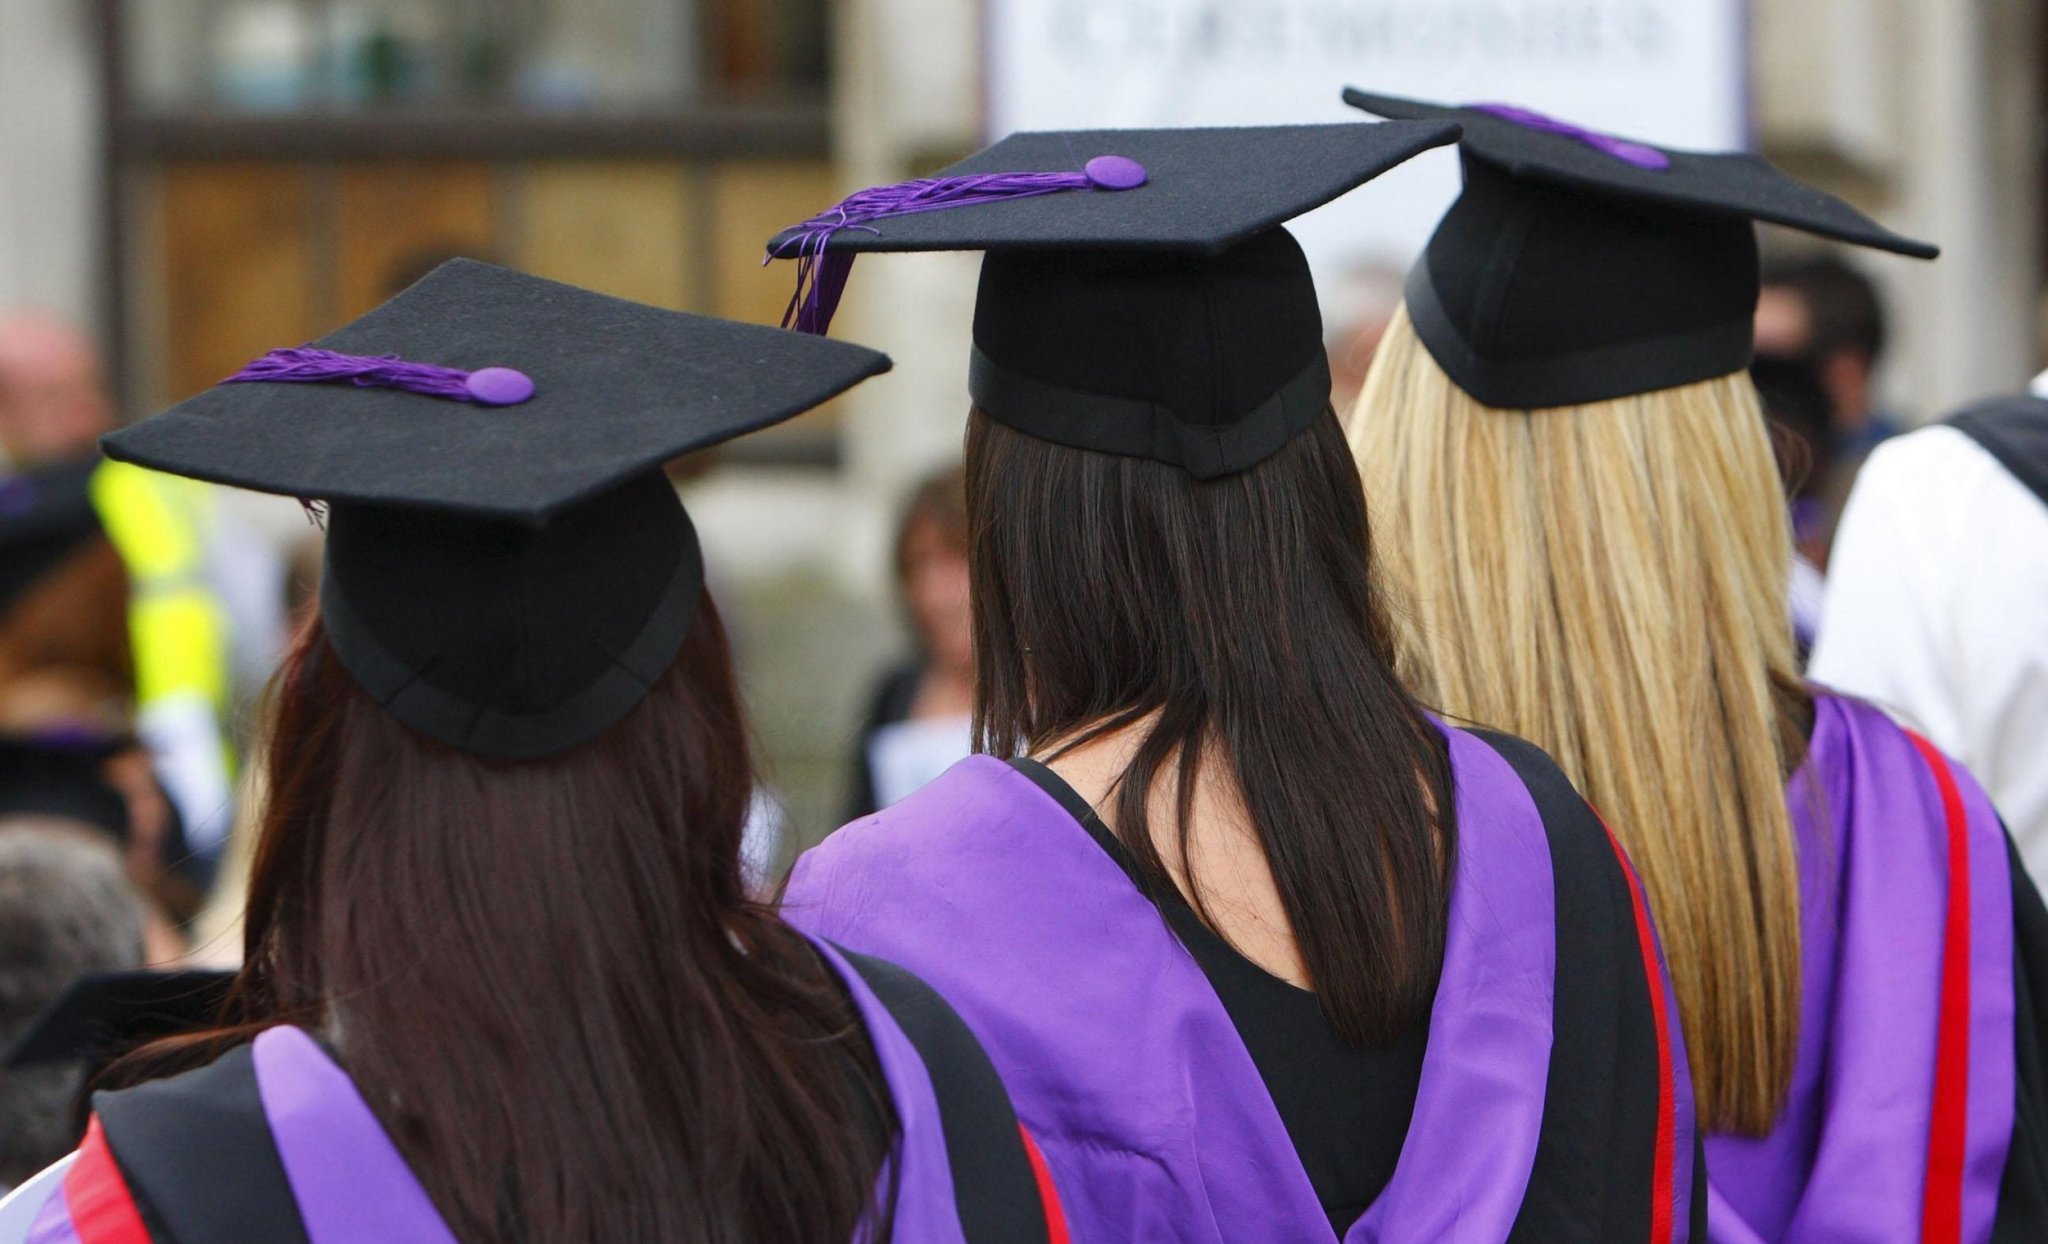 University applications: Record number of UK students from poorest backgrounds apply